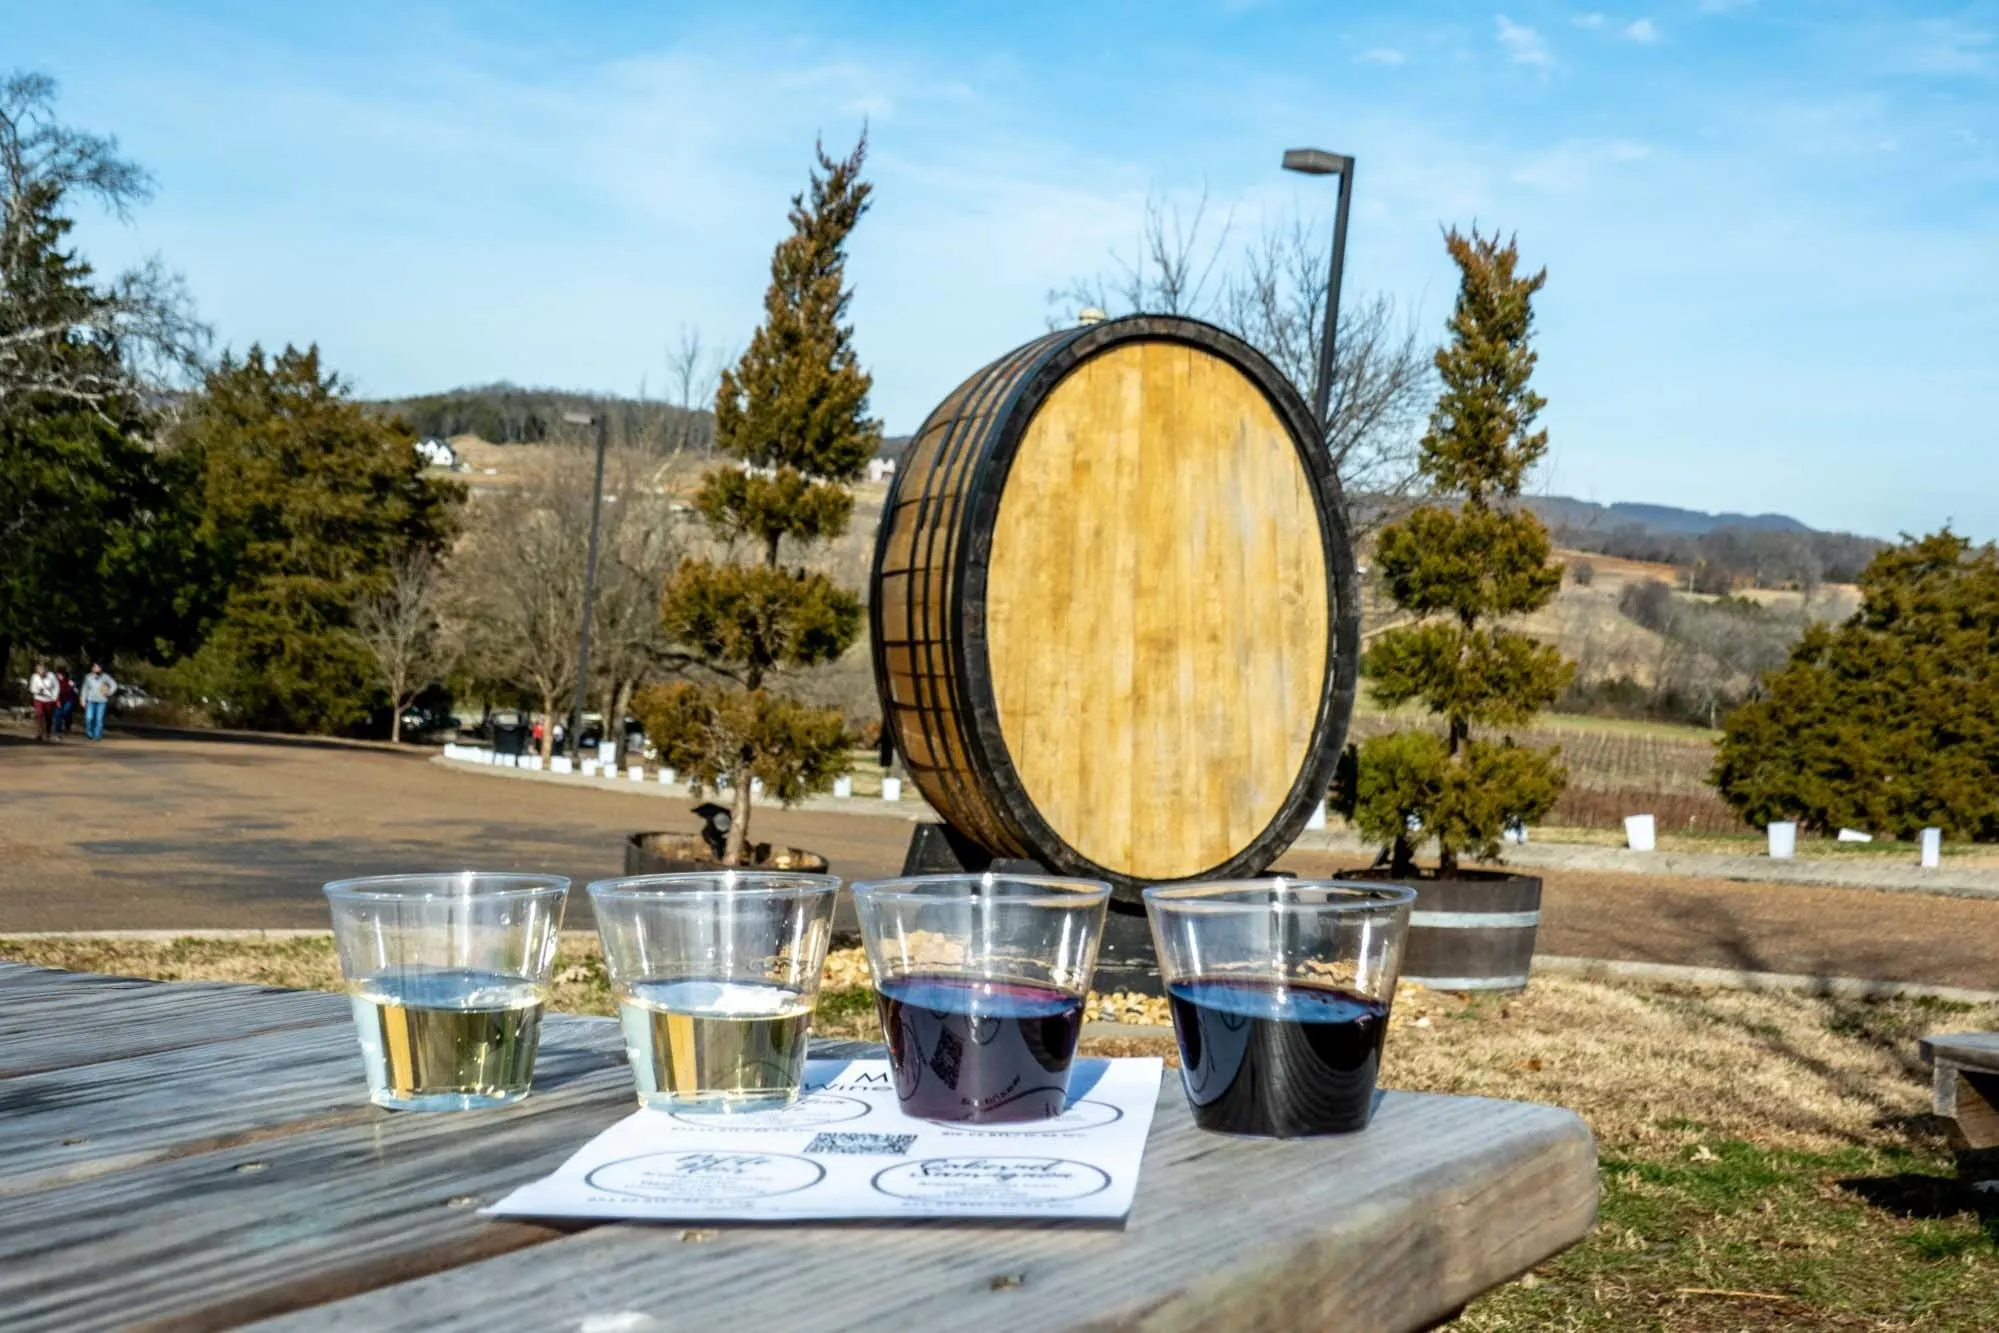 Wine tasting flight on a picnic table beside a large wooden barrel.